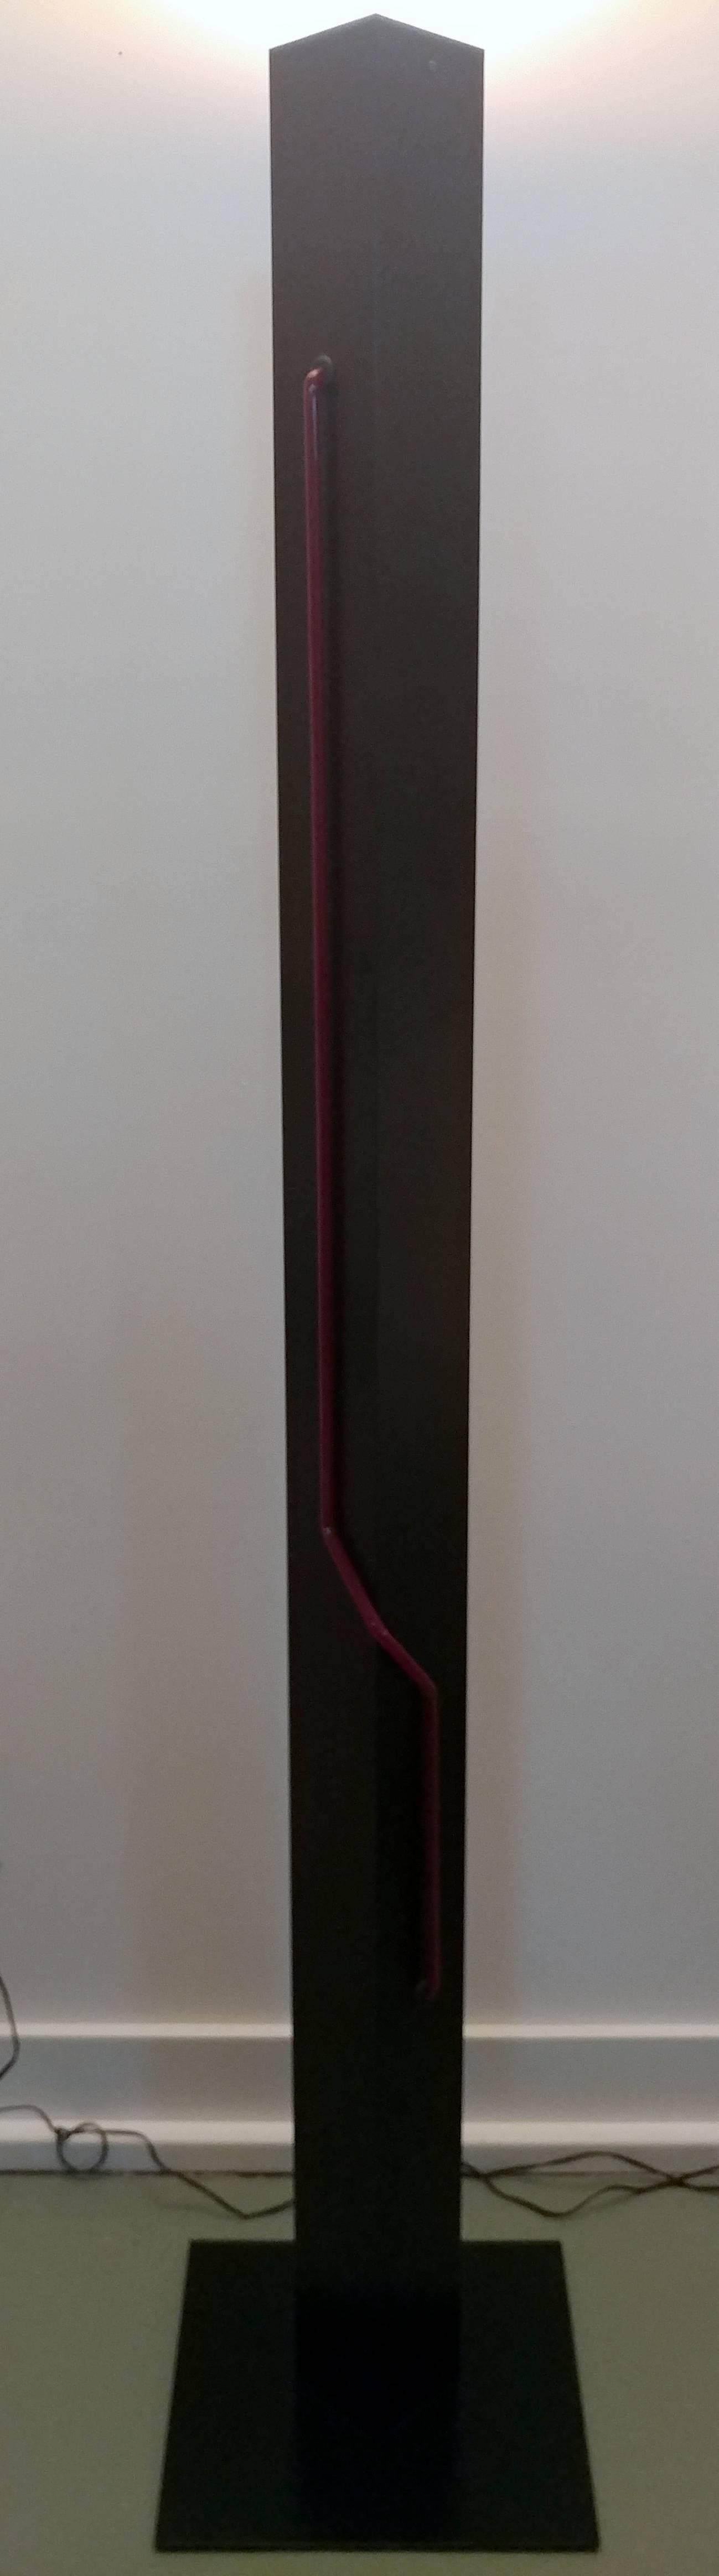 A series from Let There Be Neon by artist Rudi Stern created during late 1970s. A Torchiere up light with dimmer in black power-coated body, red neon tube light in separate on-off switch. Functionality and statement art piece either on or off. Two